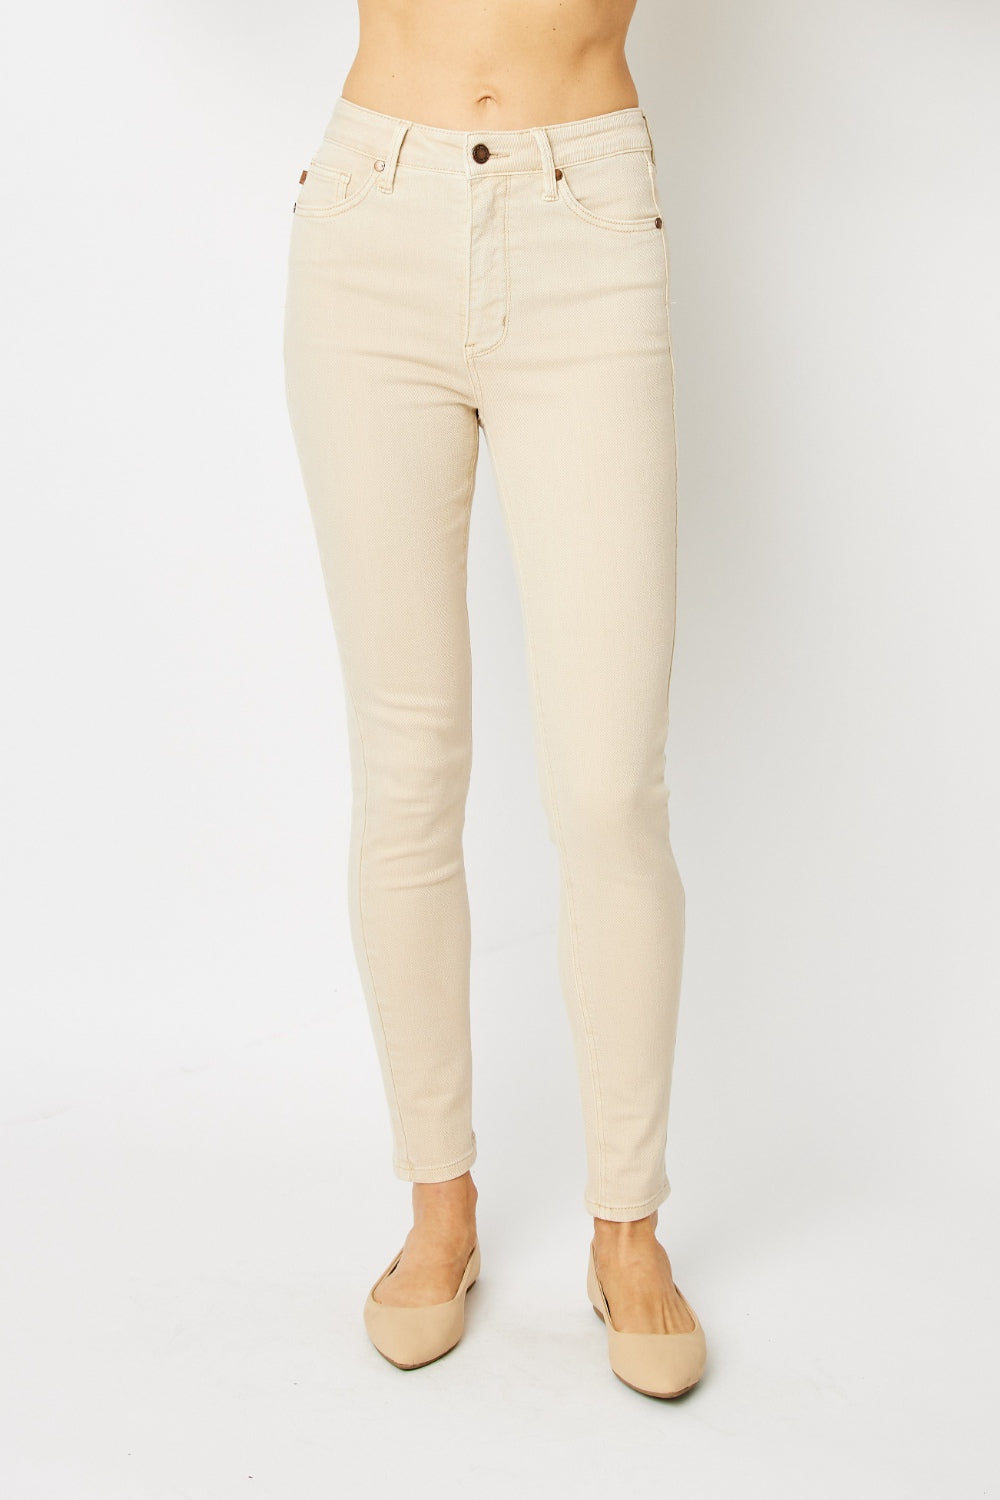 Taupe Topic Skinny Jeans - Cheeky Chic Boutique